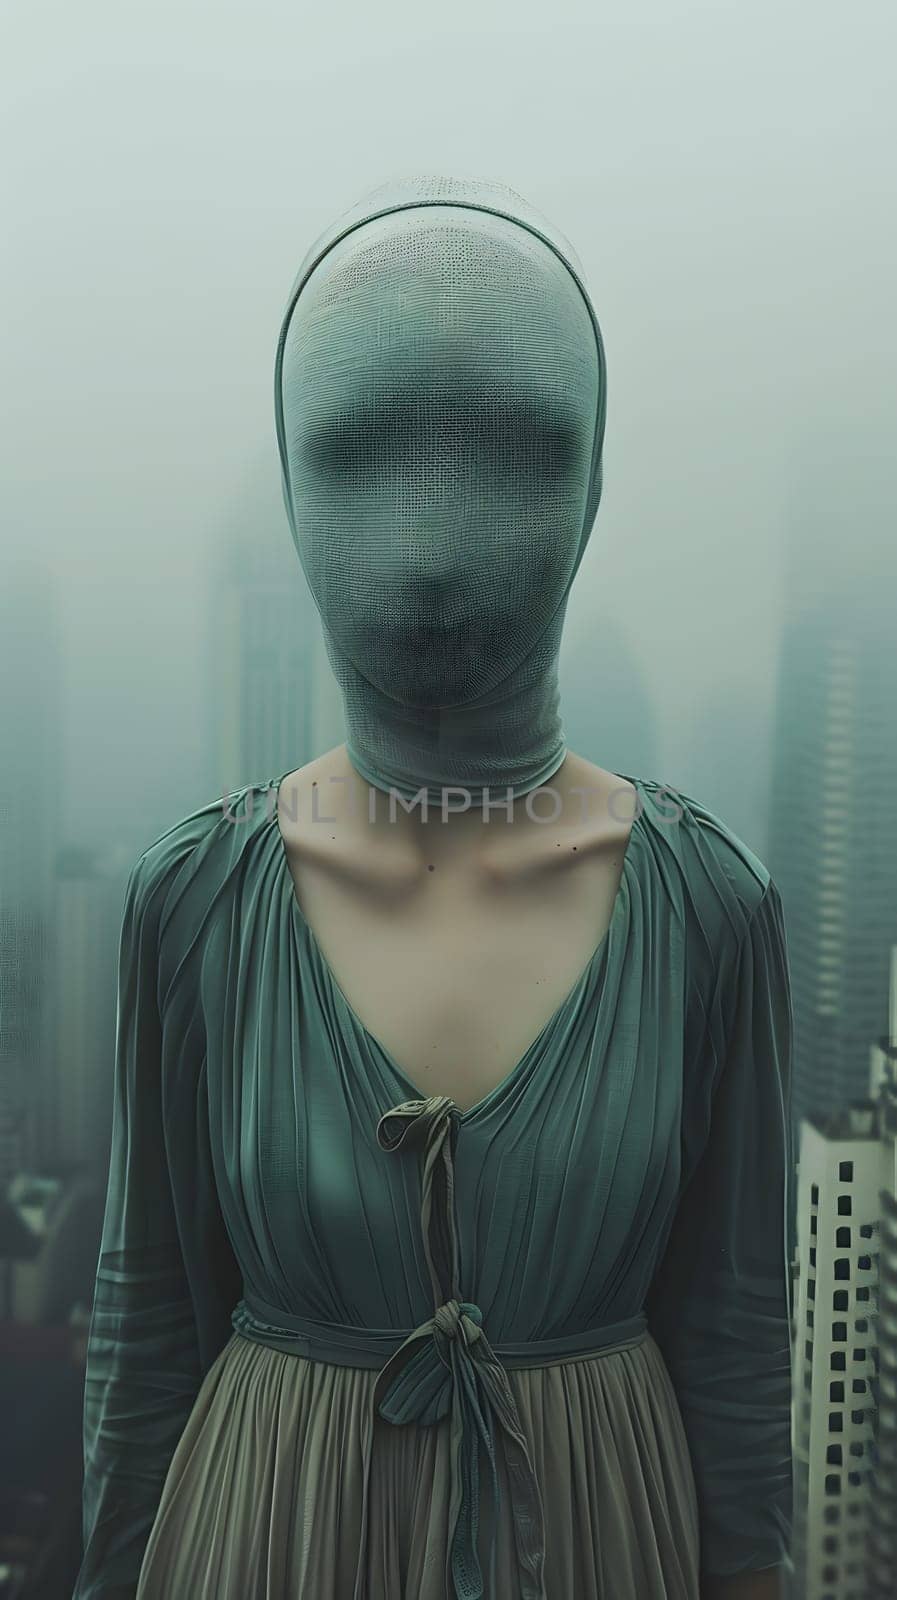 A woman, with a mask on her face, stands in front of a foggy city. Her electric blue sleeve contrasts with the darkness. Her gesture speaks of art and fashion design